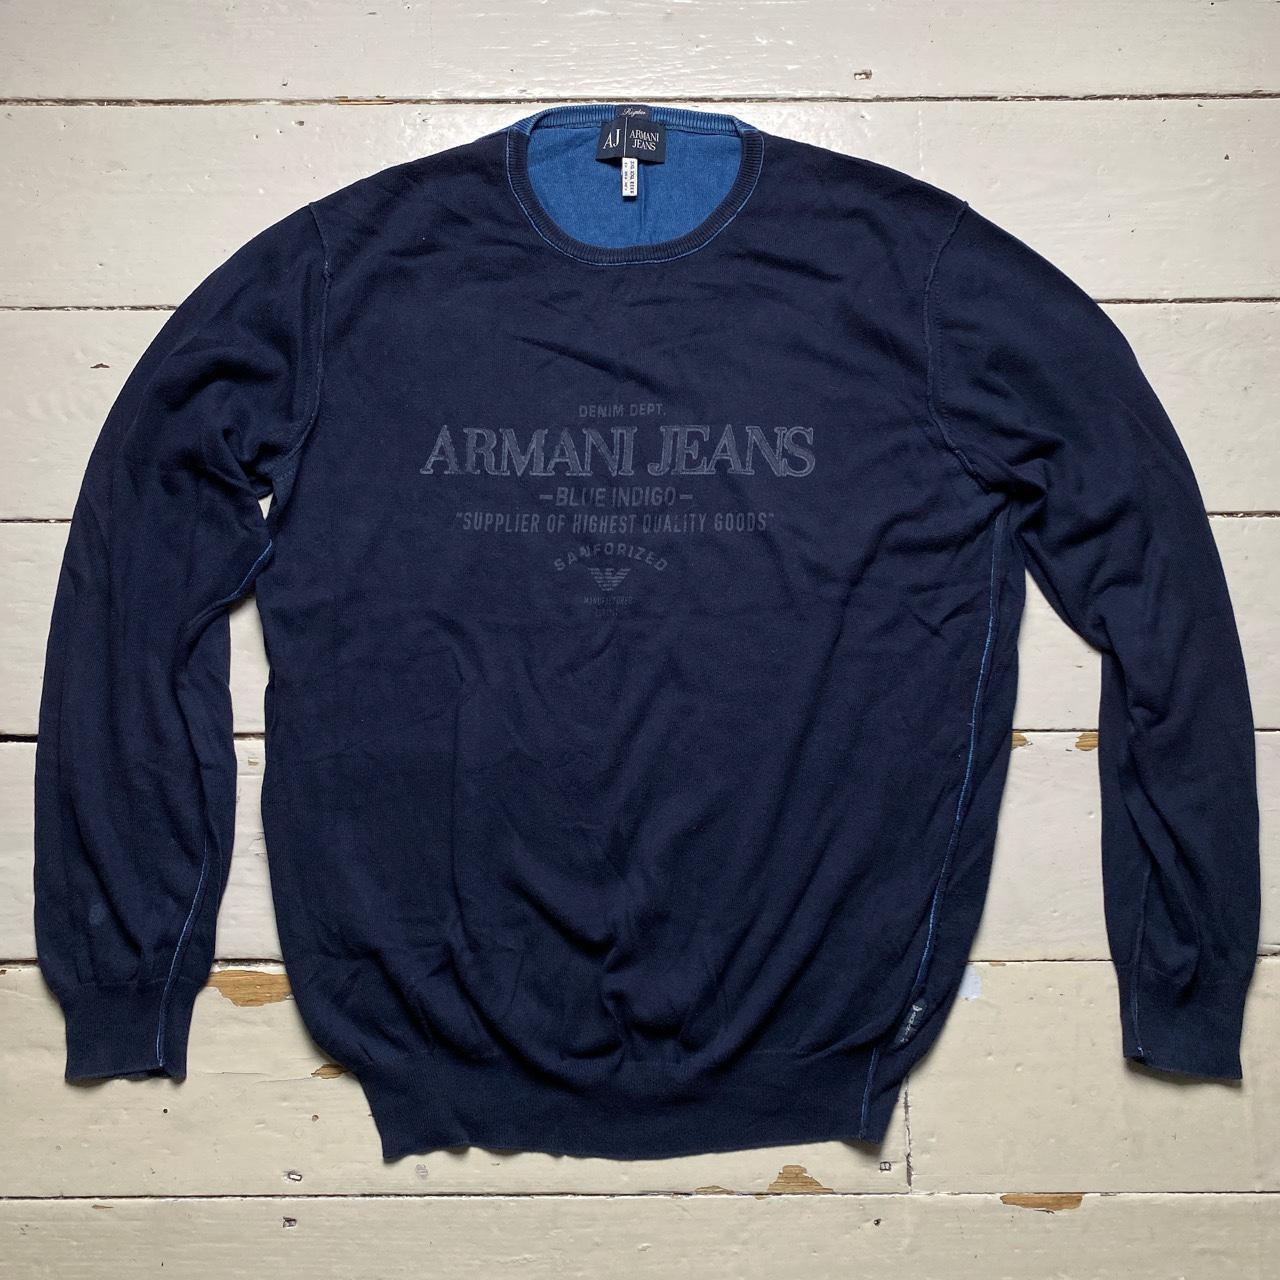 Armani Jeans Navy and Blue Jumper